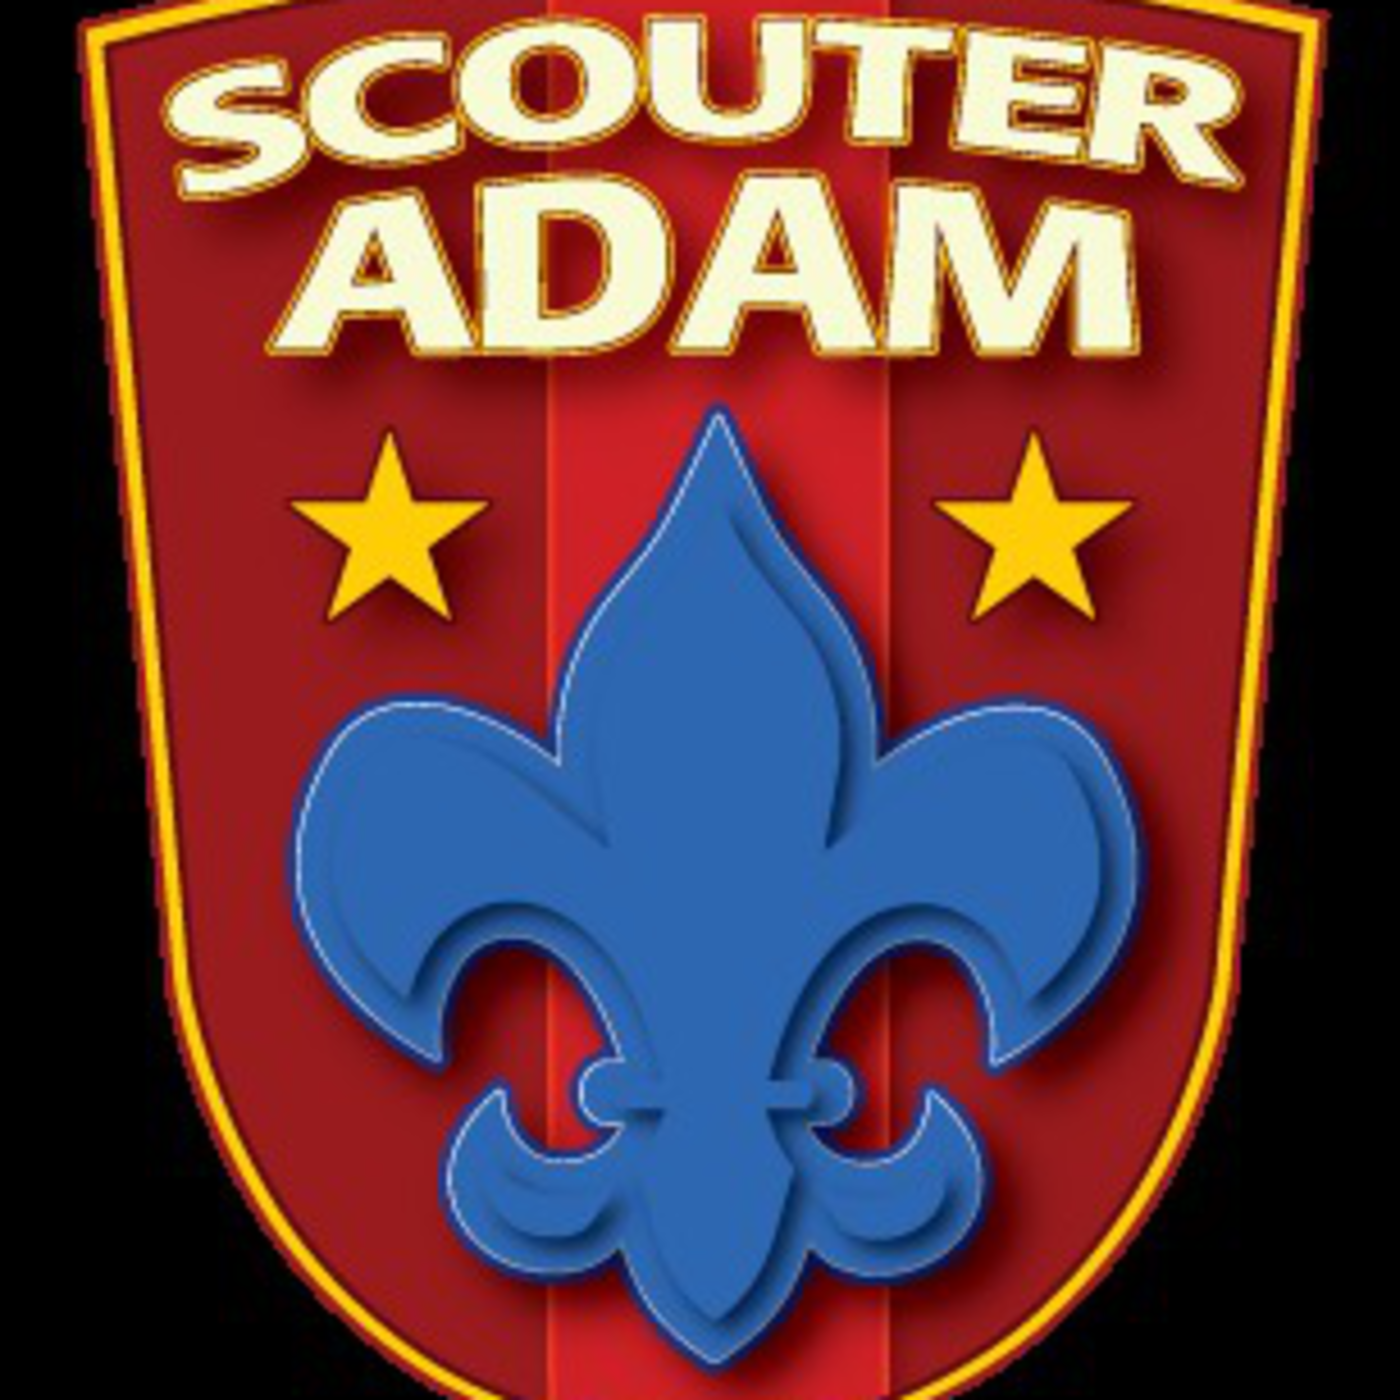 Who is Scouter Adam